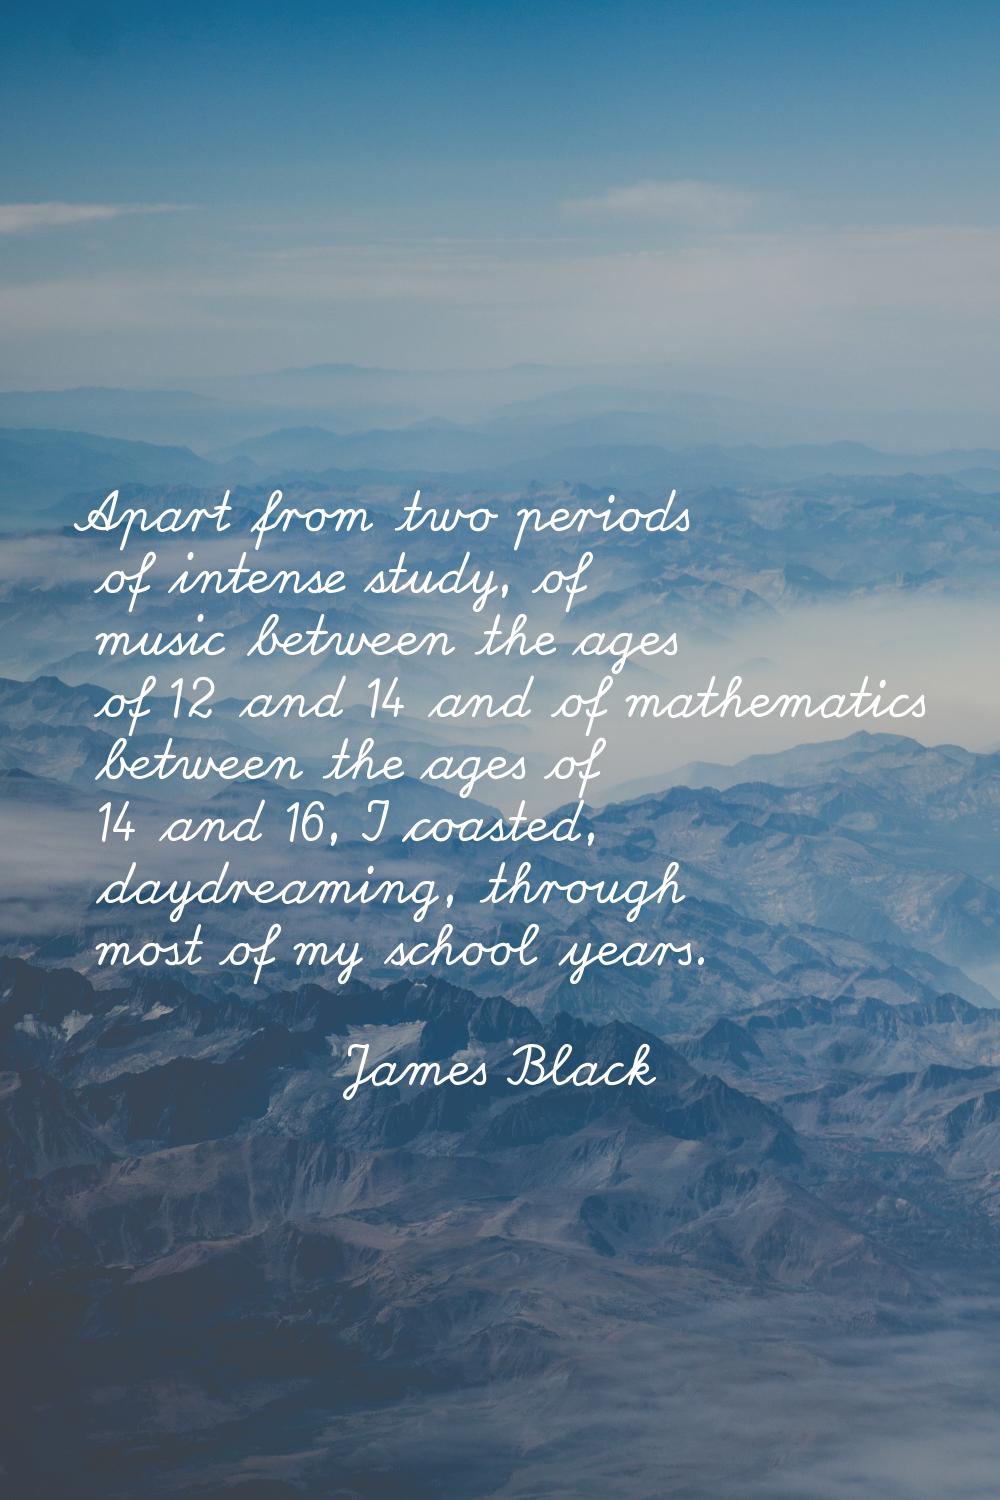 Apart from two periods of intense study, of music between the ages of 12 and 14 and of mathematics 